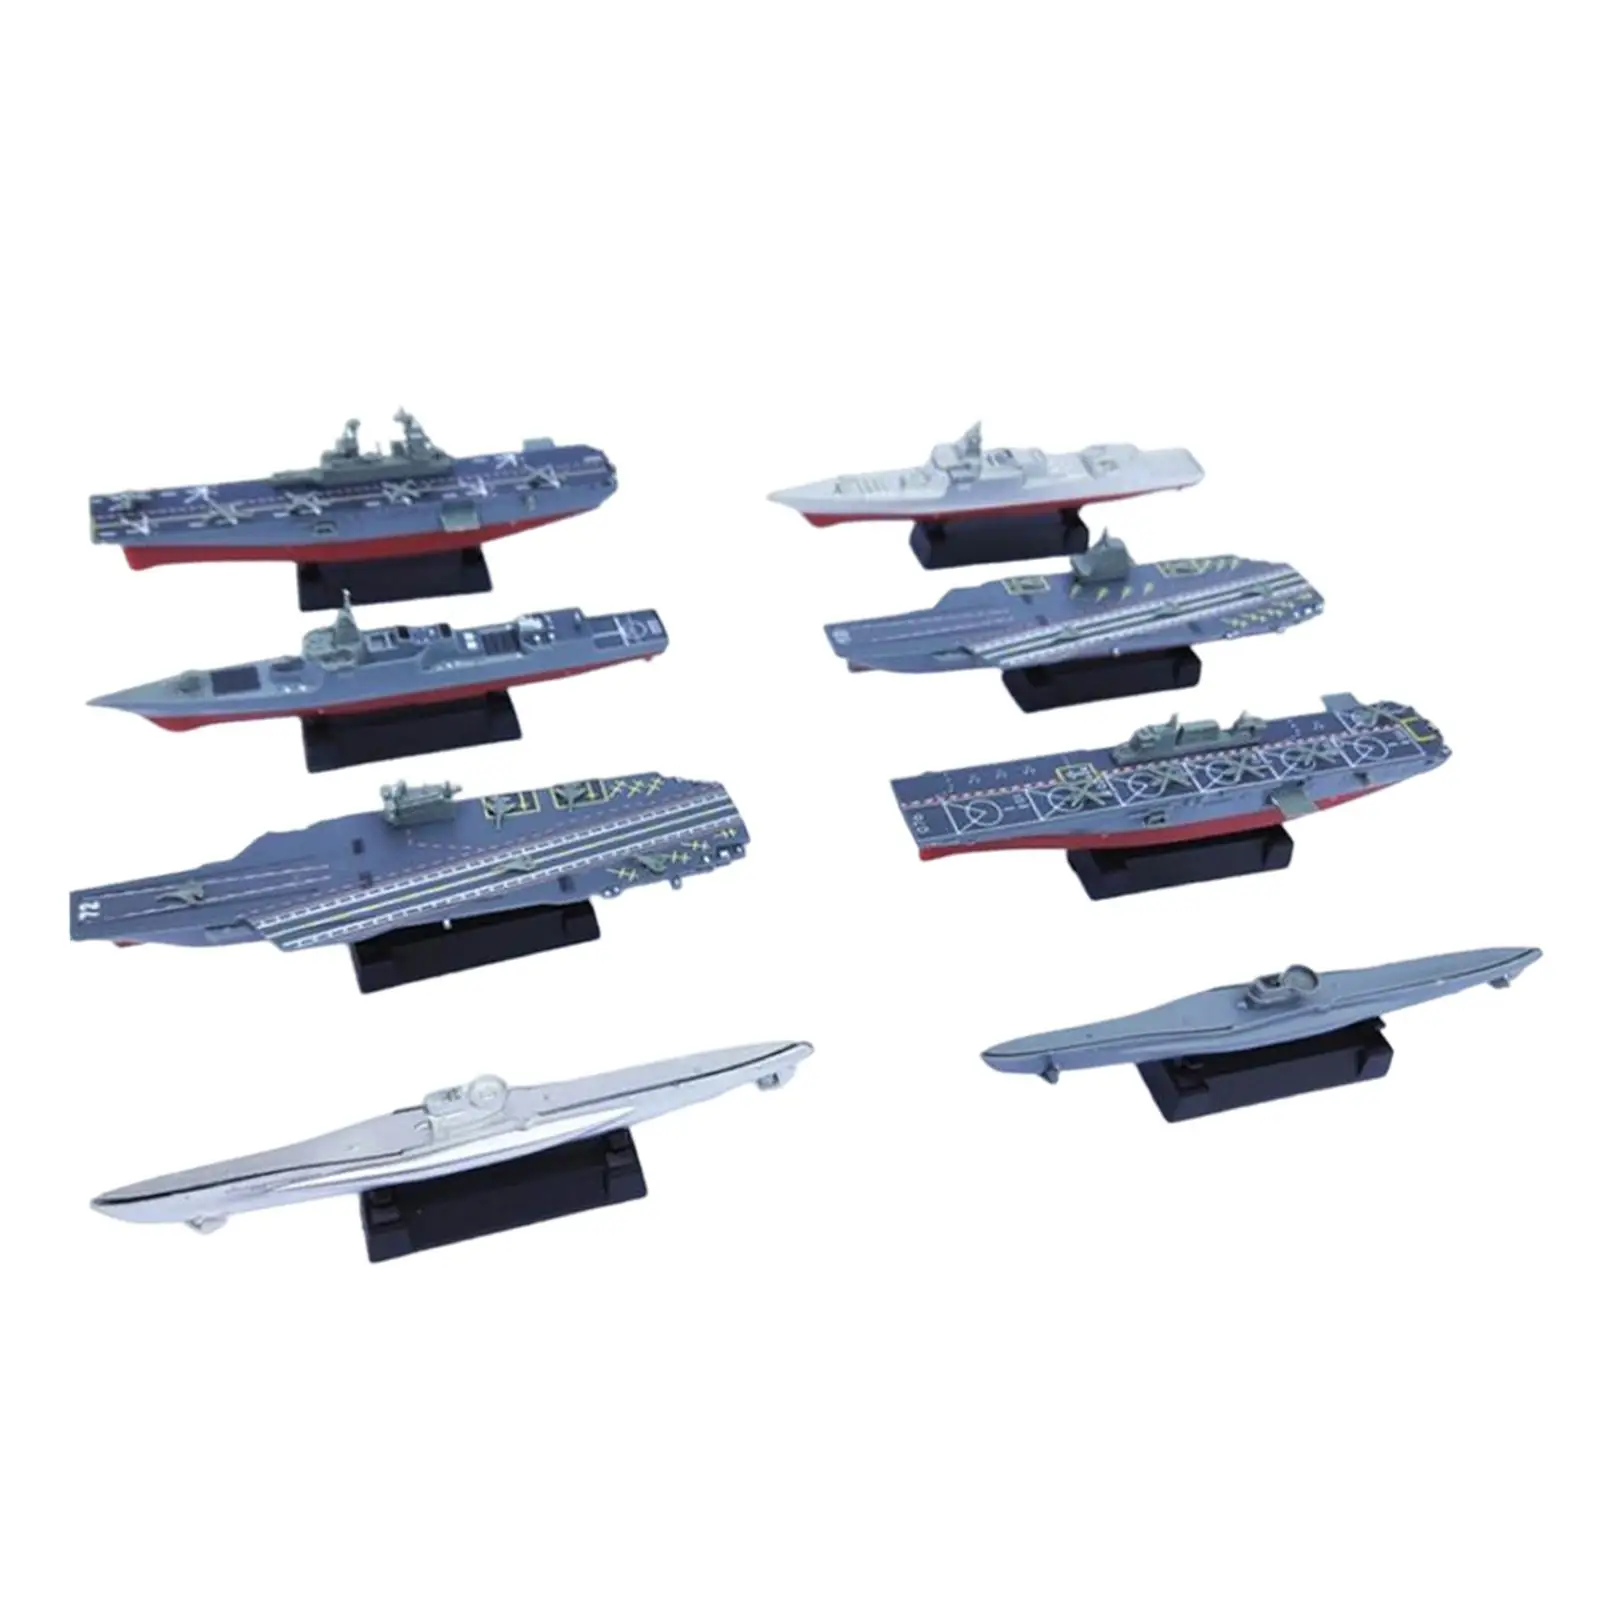 

8x 4D Assembled Ship Model DIY Assemble Puzzle Toys Educational Toys Aircraft Carrier Toy for Adults Children Girls Kids Gifts